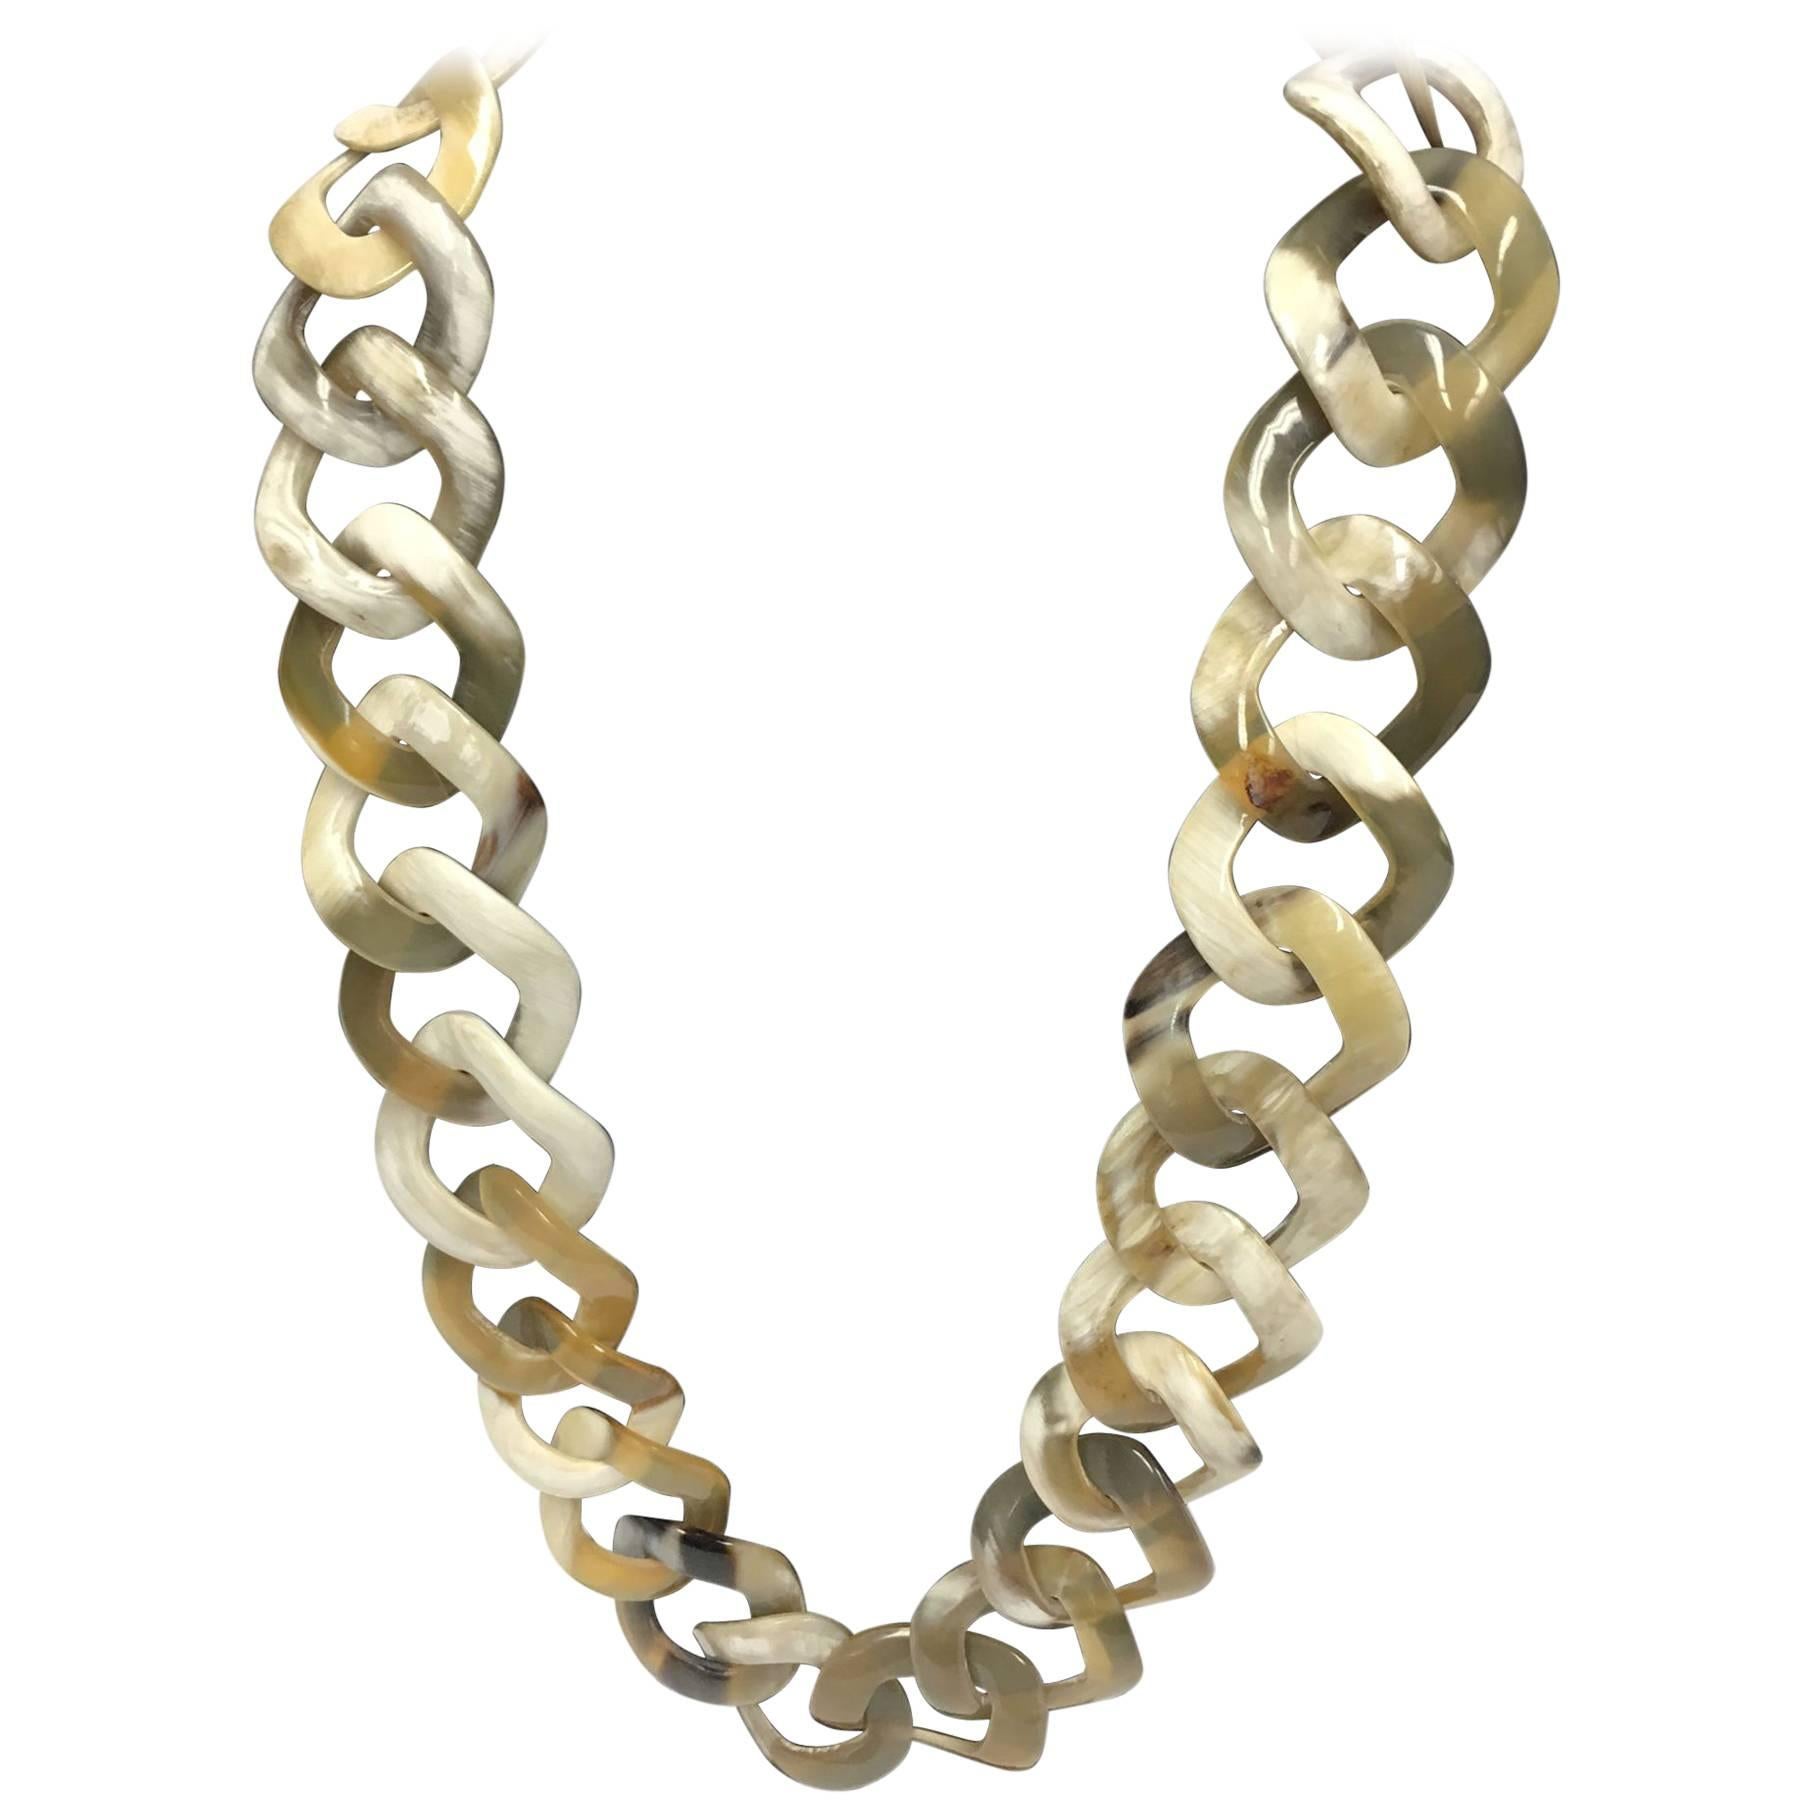 Chic Long Faux Horn Statement Link Necklace